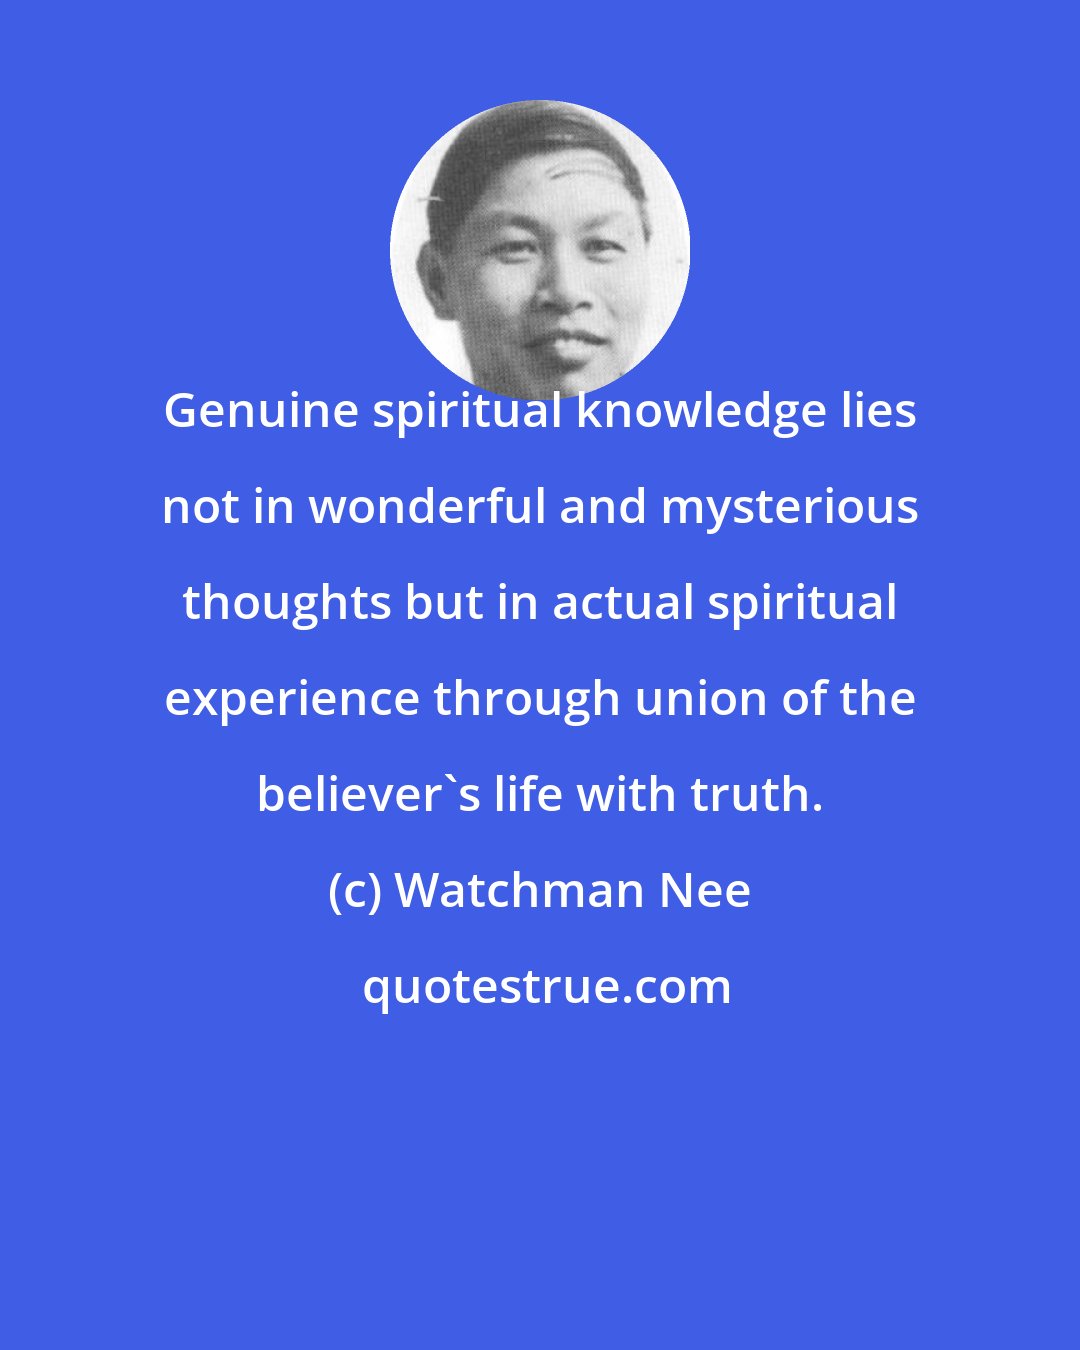 Watchman Nee: Genuine spiritual knowledge lies not in wonderful and mysterious thoughts but in actual spiritual experience through union of the believer's life with truth.